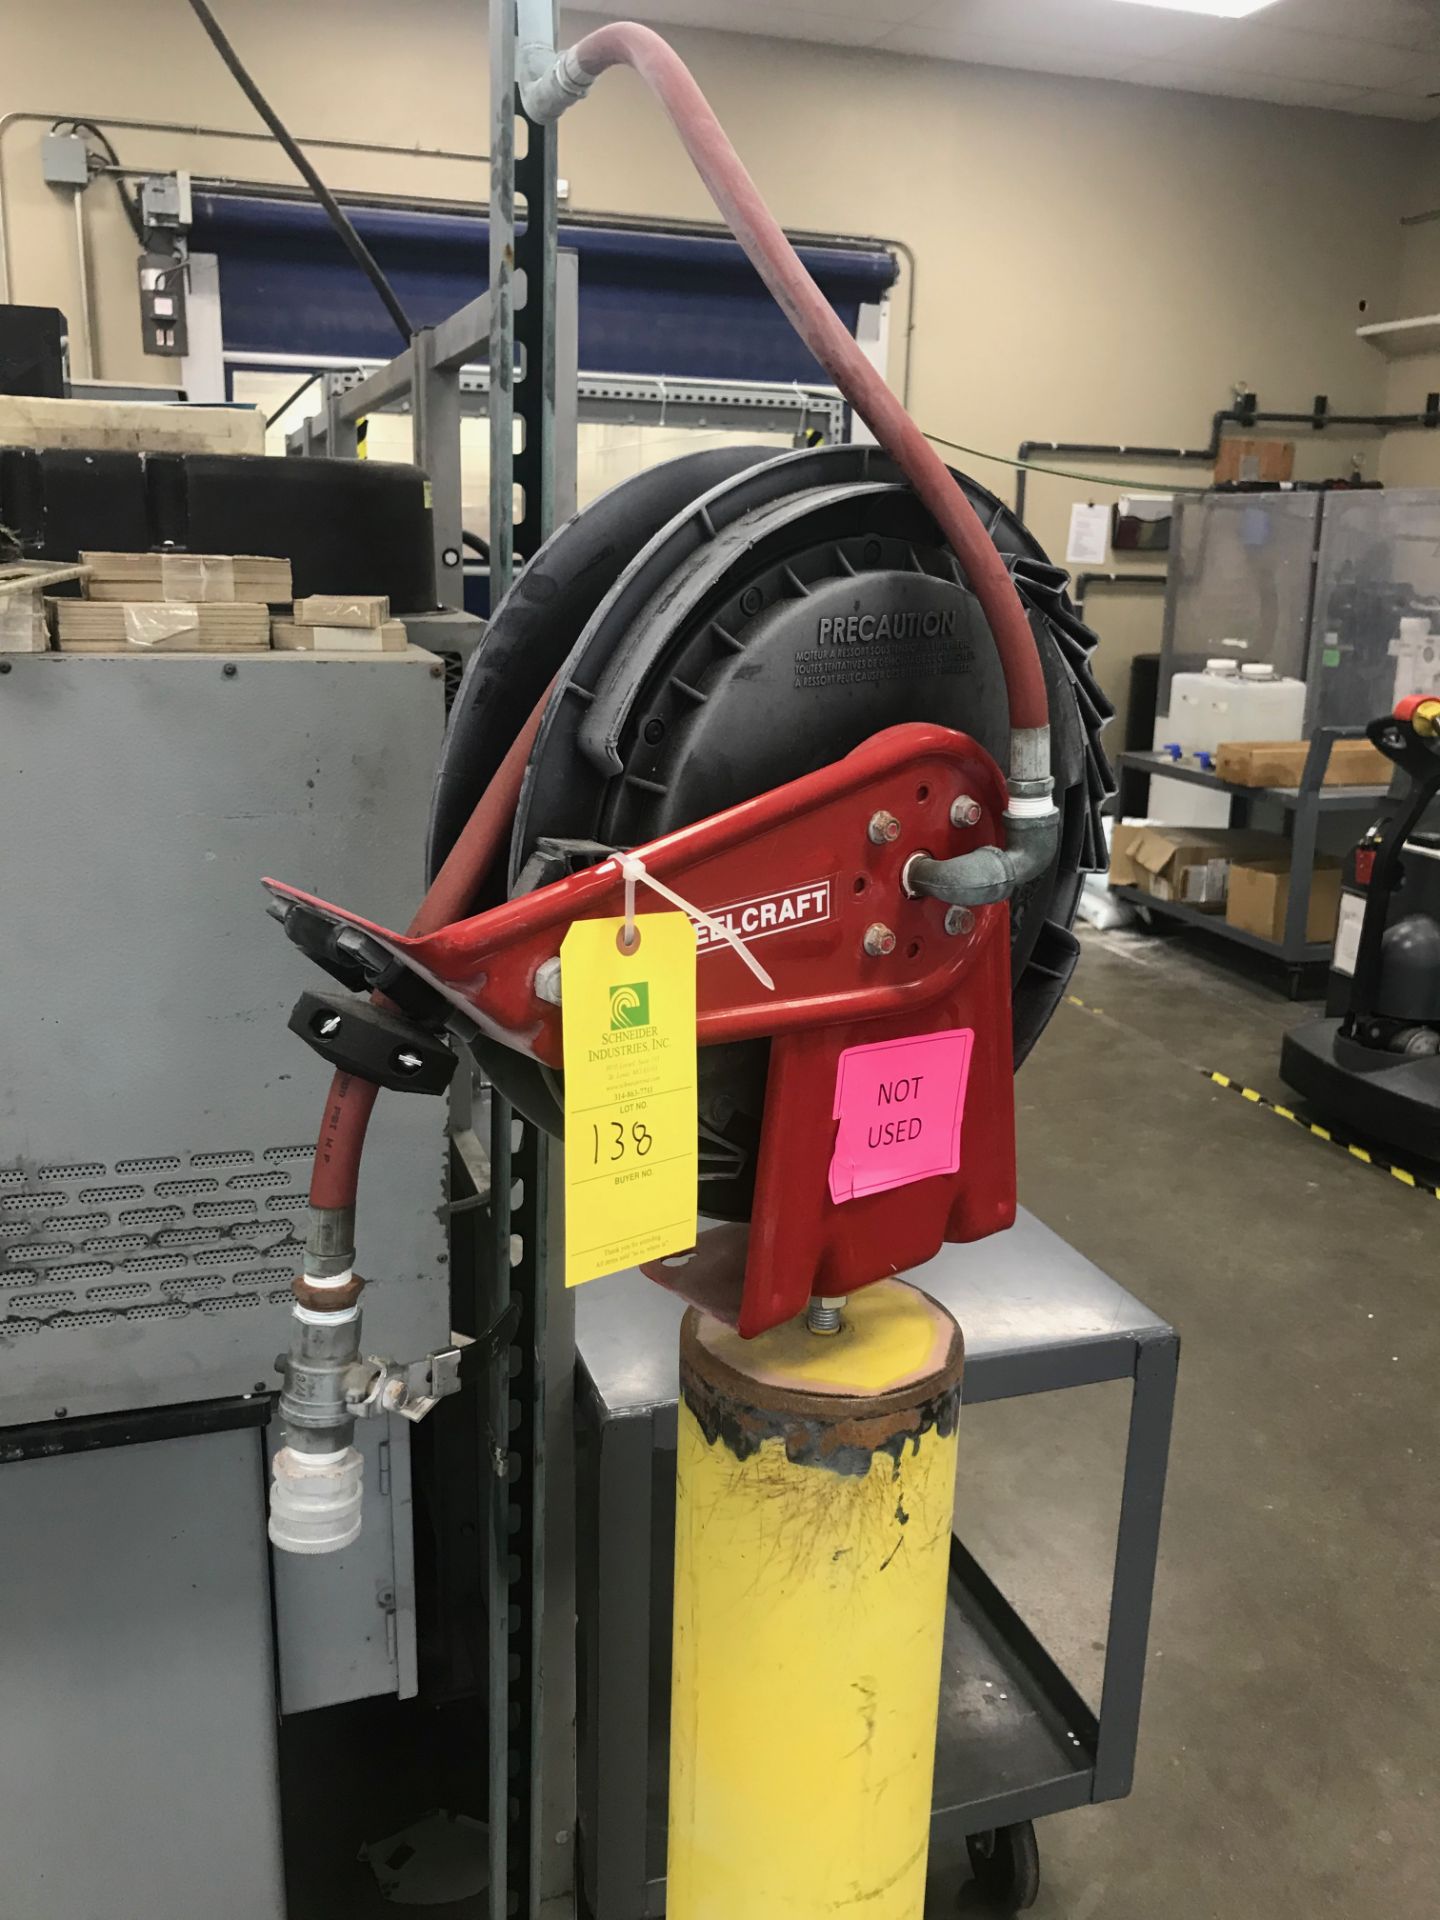 WheelCraft Air Hose Reel, Removal Fee: $20